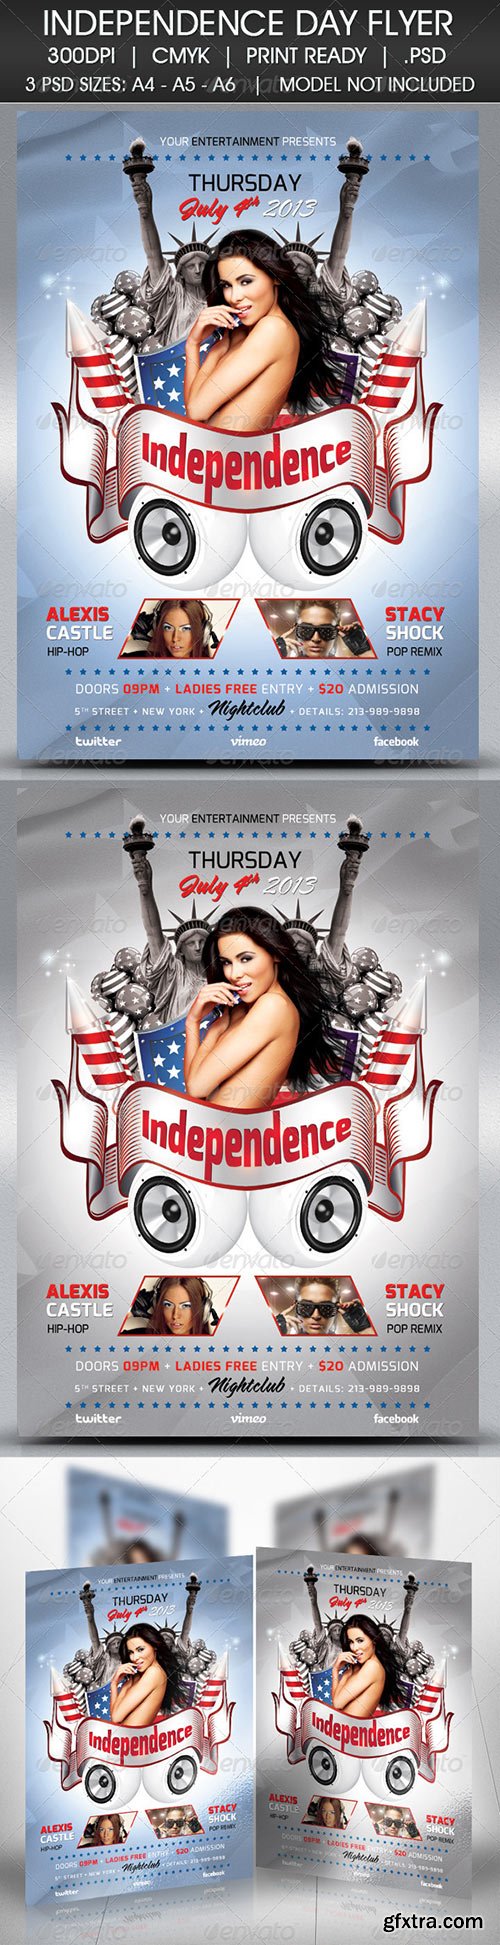 GraphicRiver - Independence Day Flyer 4734302